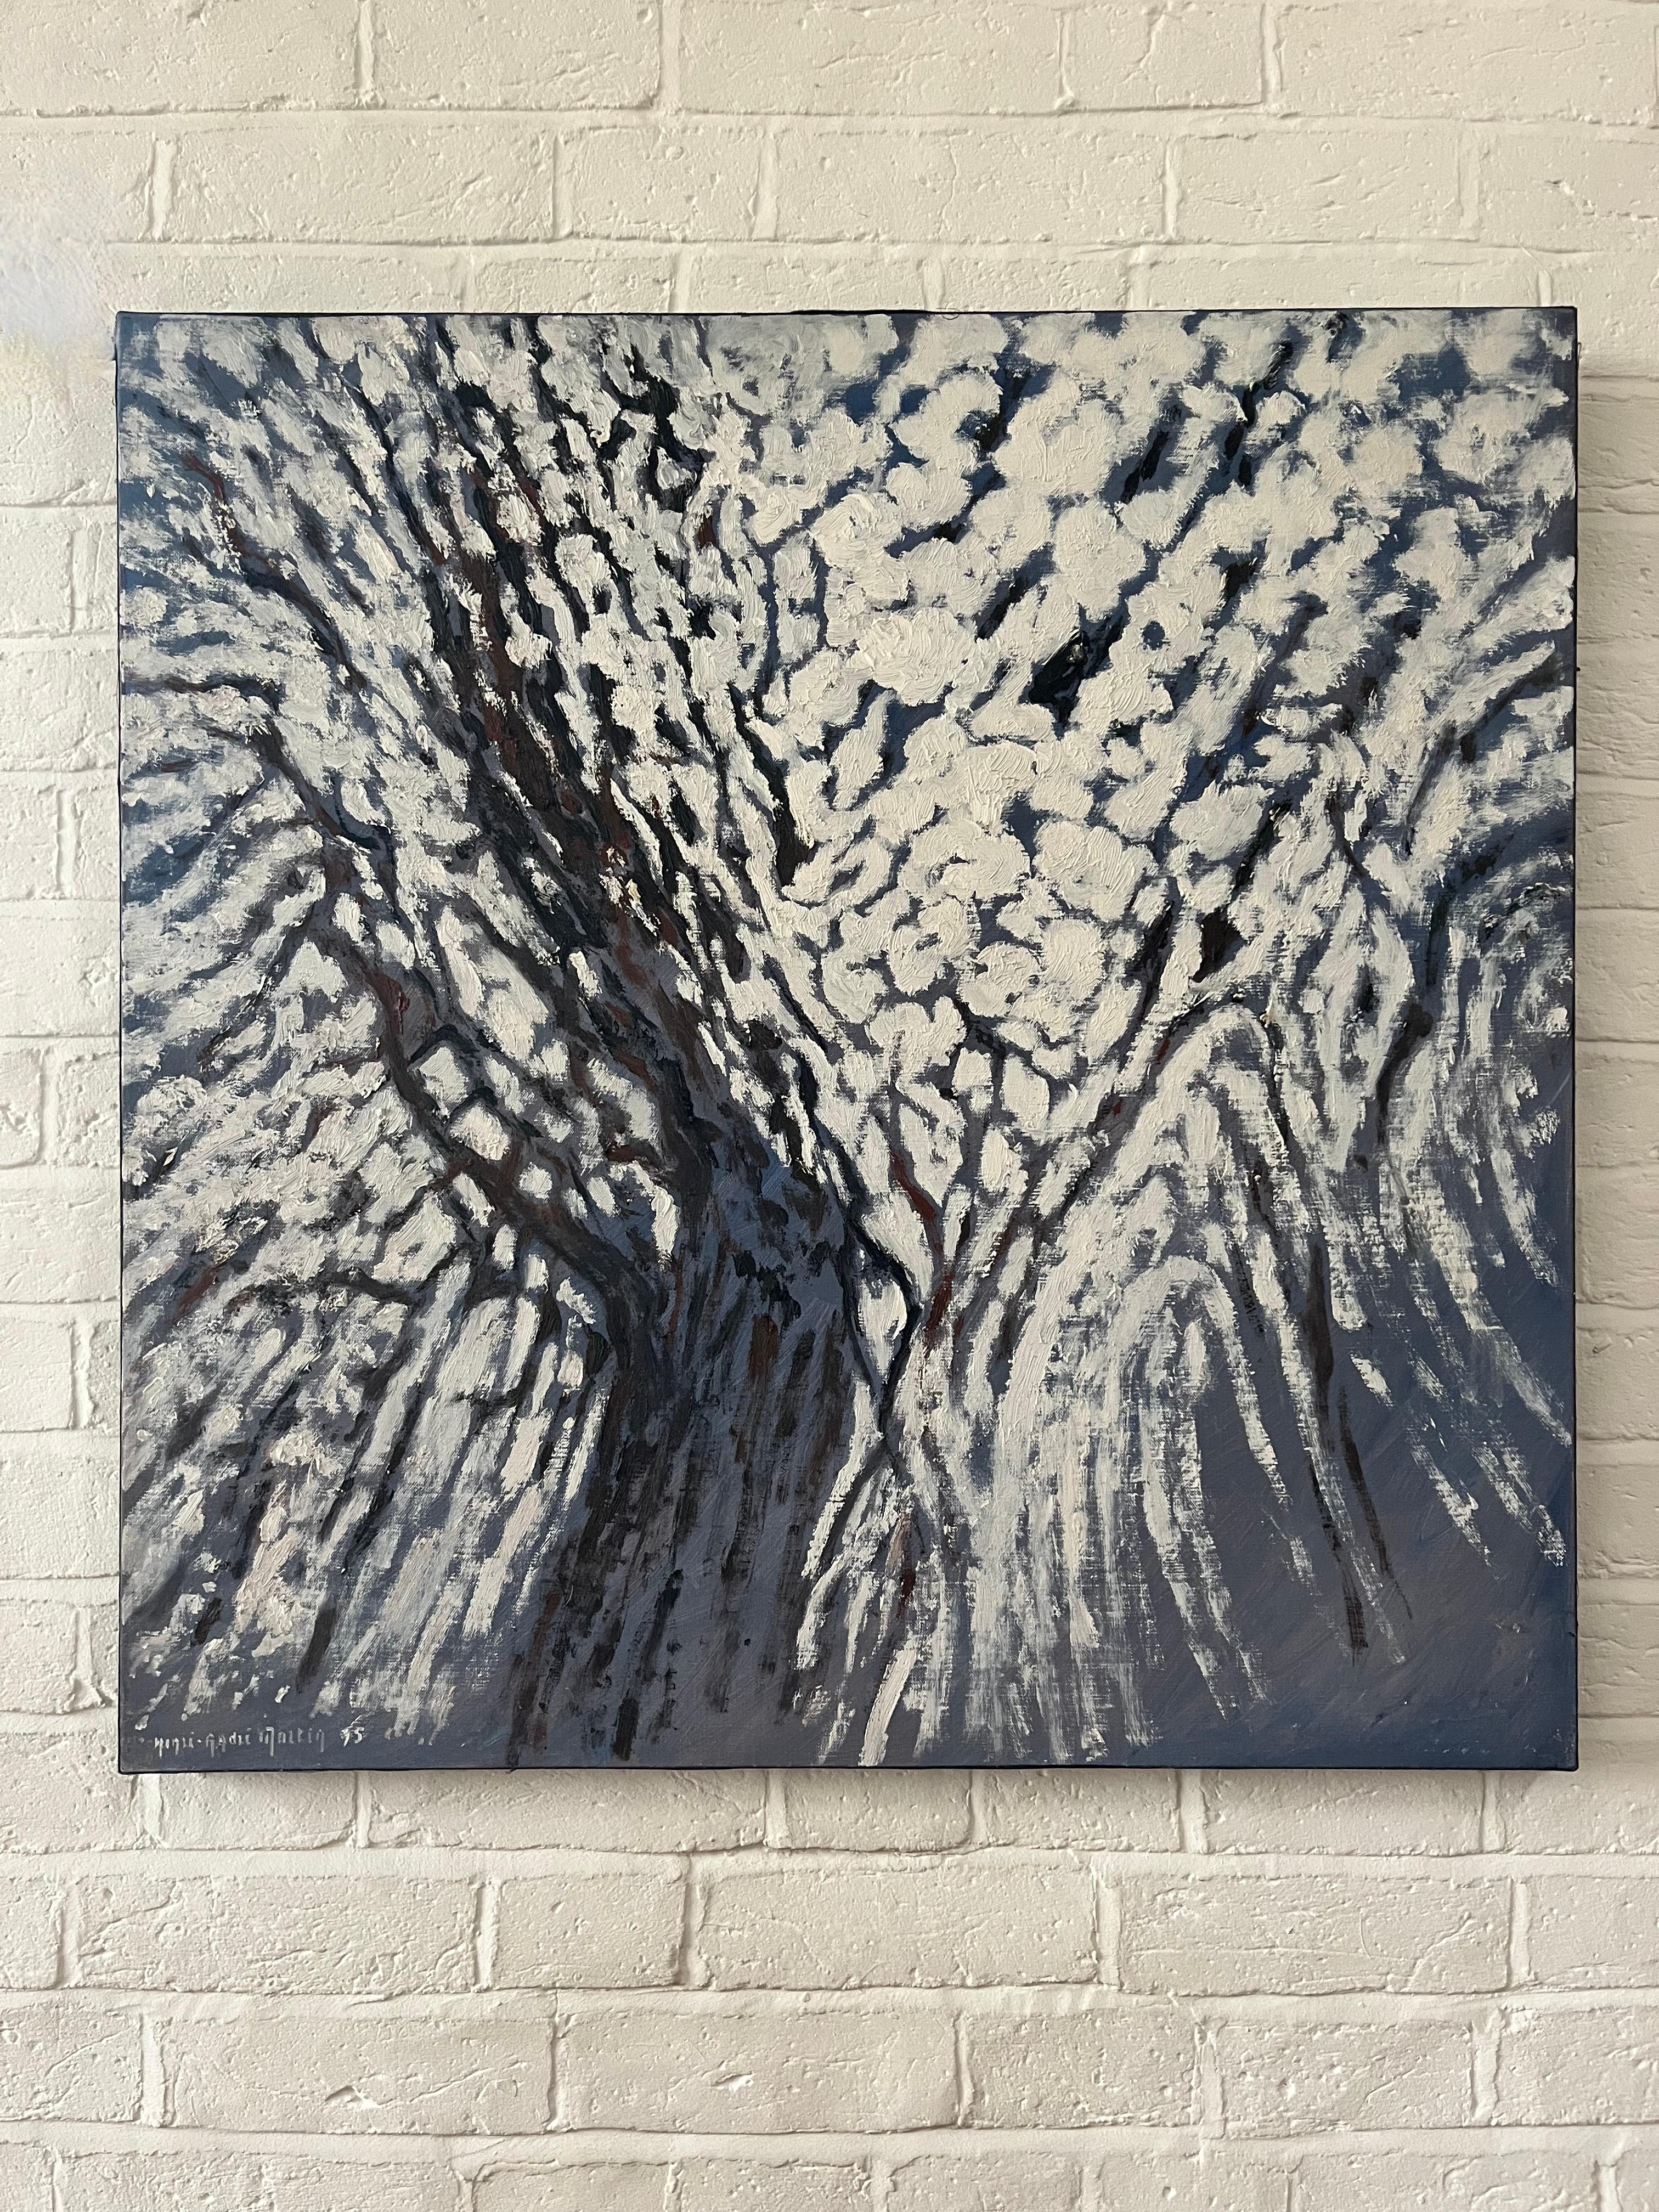 An incredibly striking image of an almond tree in flower, the canopy of the tree dominating the whole picture space which gives an abstracted quality to the image,  Painted with great energy and with a most appealing texture to the paint